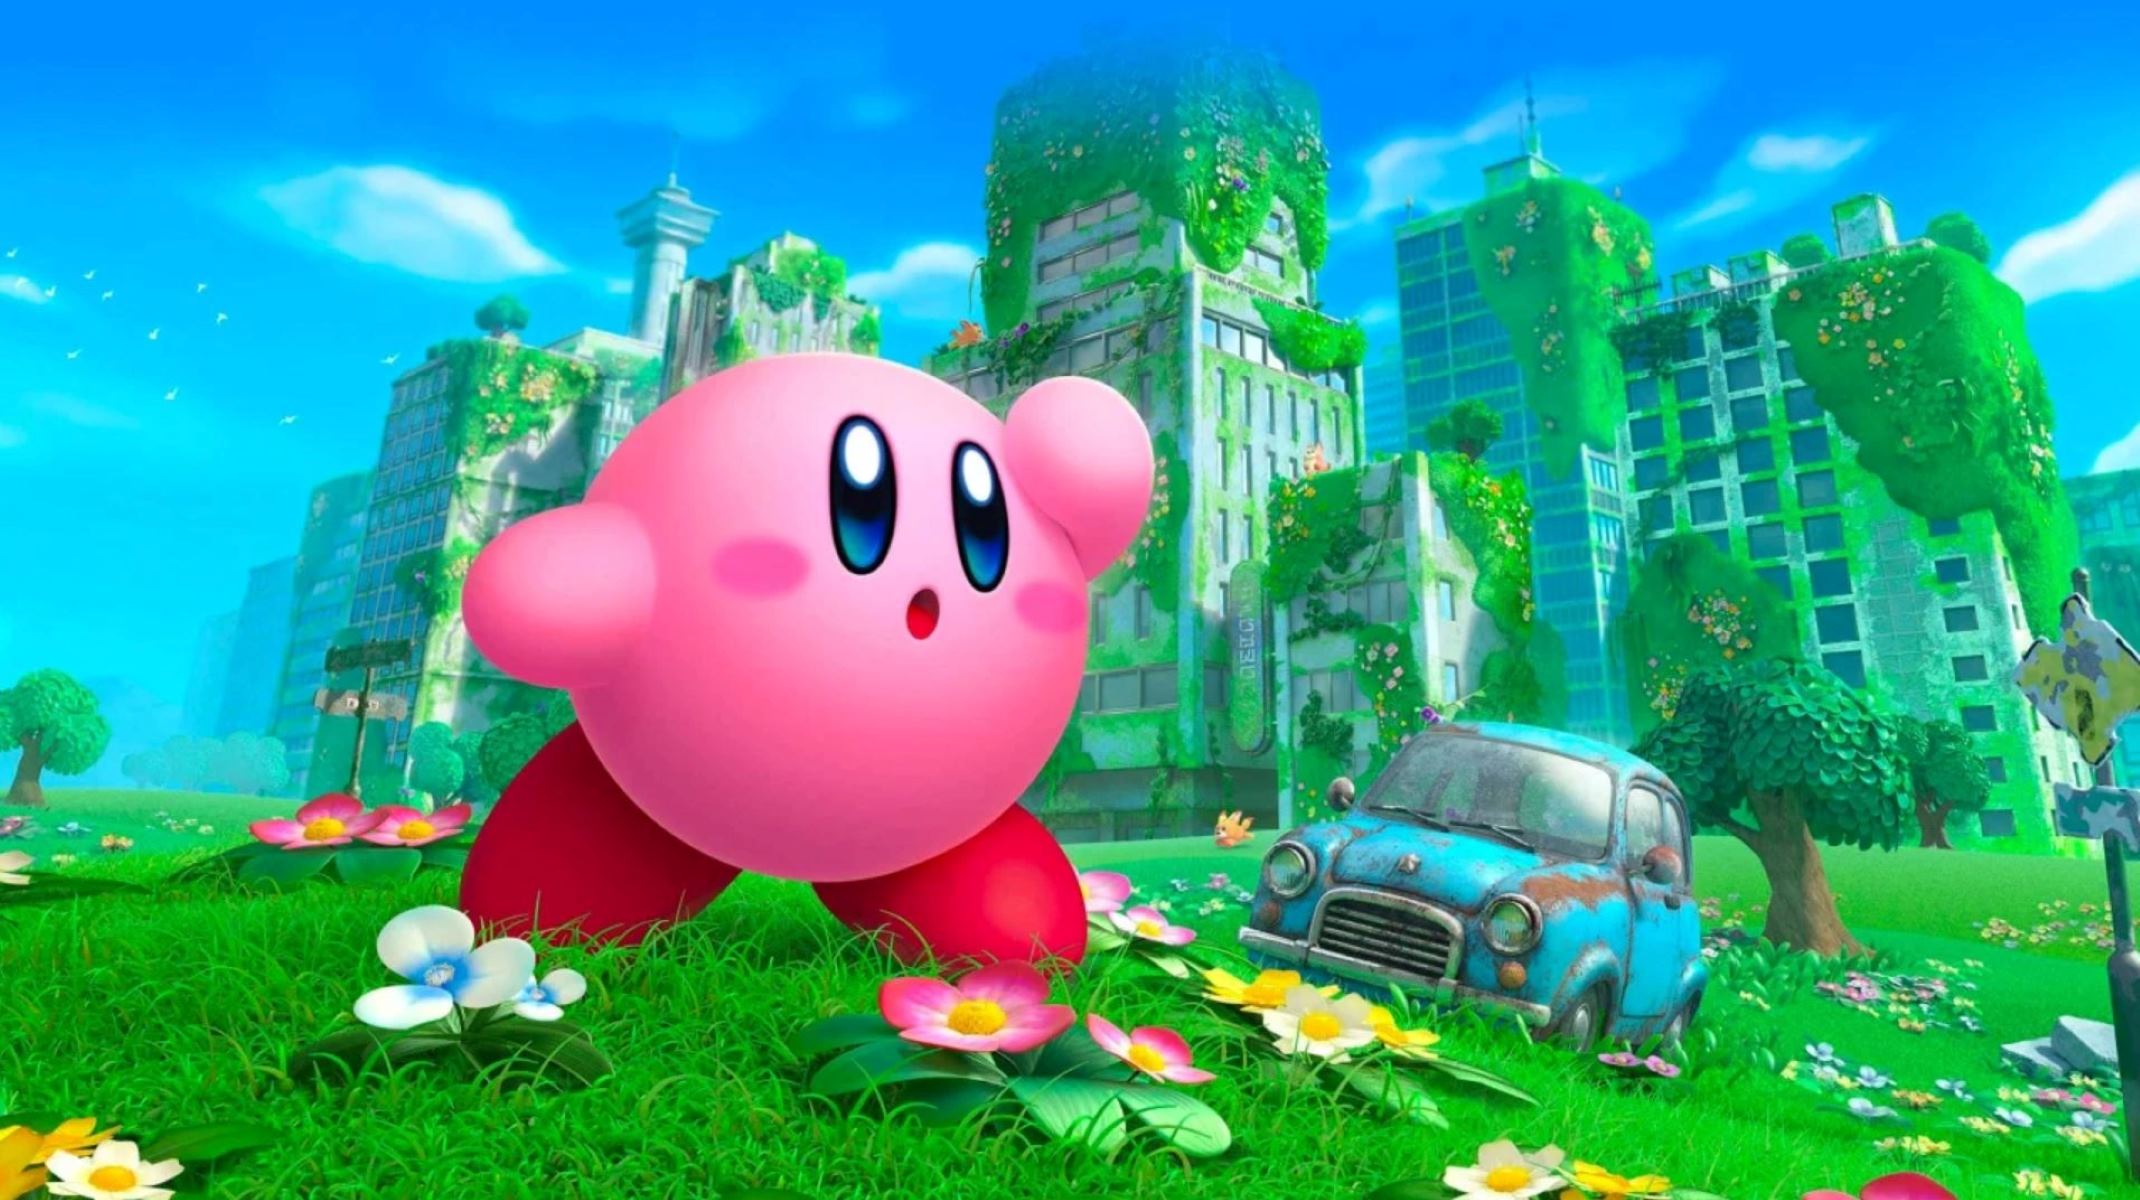 The Unbelievable Power Of Kirby: Where Does He Rank Among The Strongest?